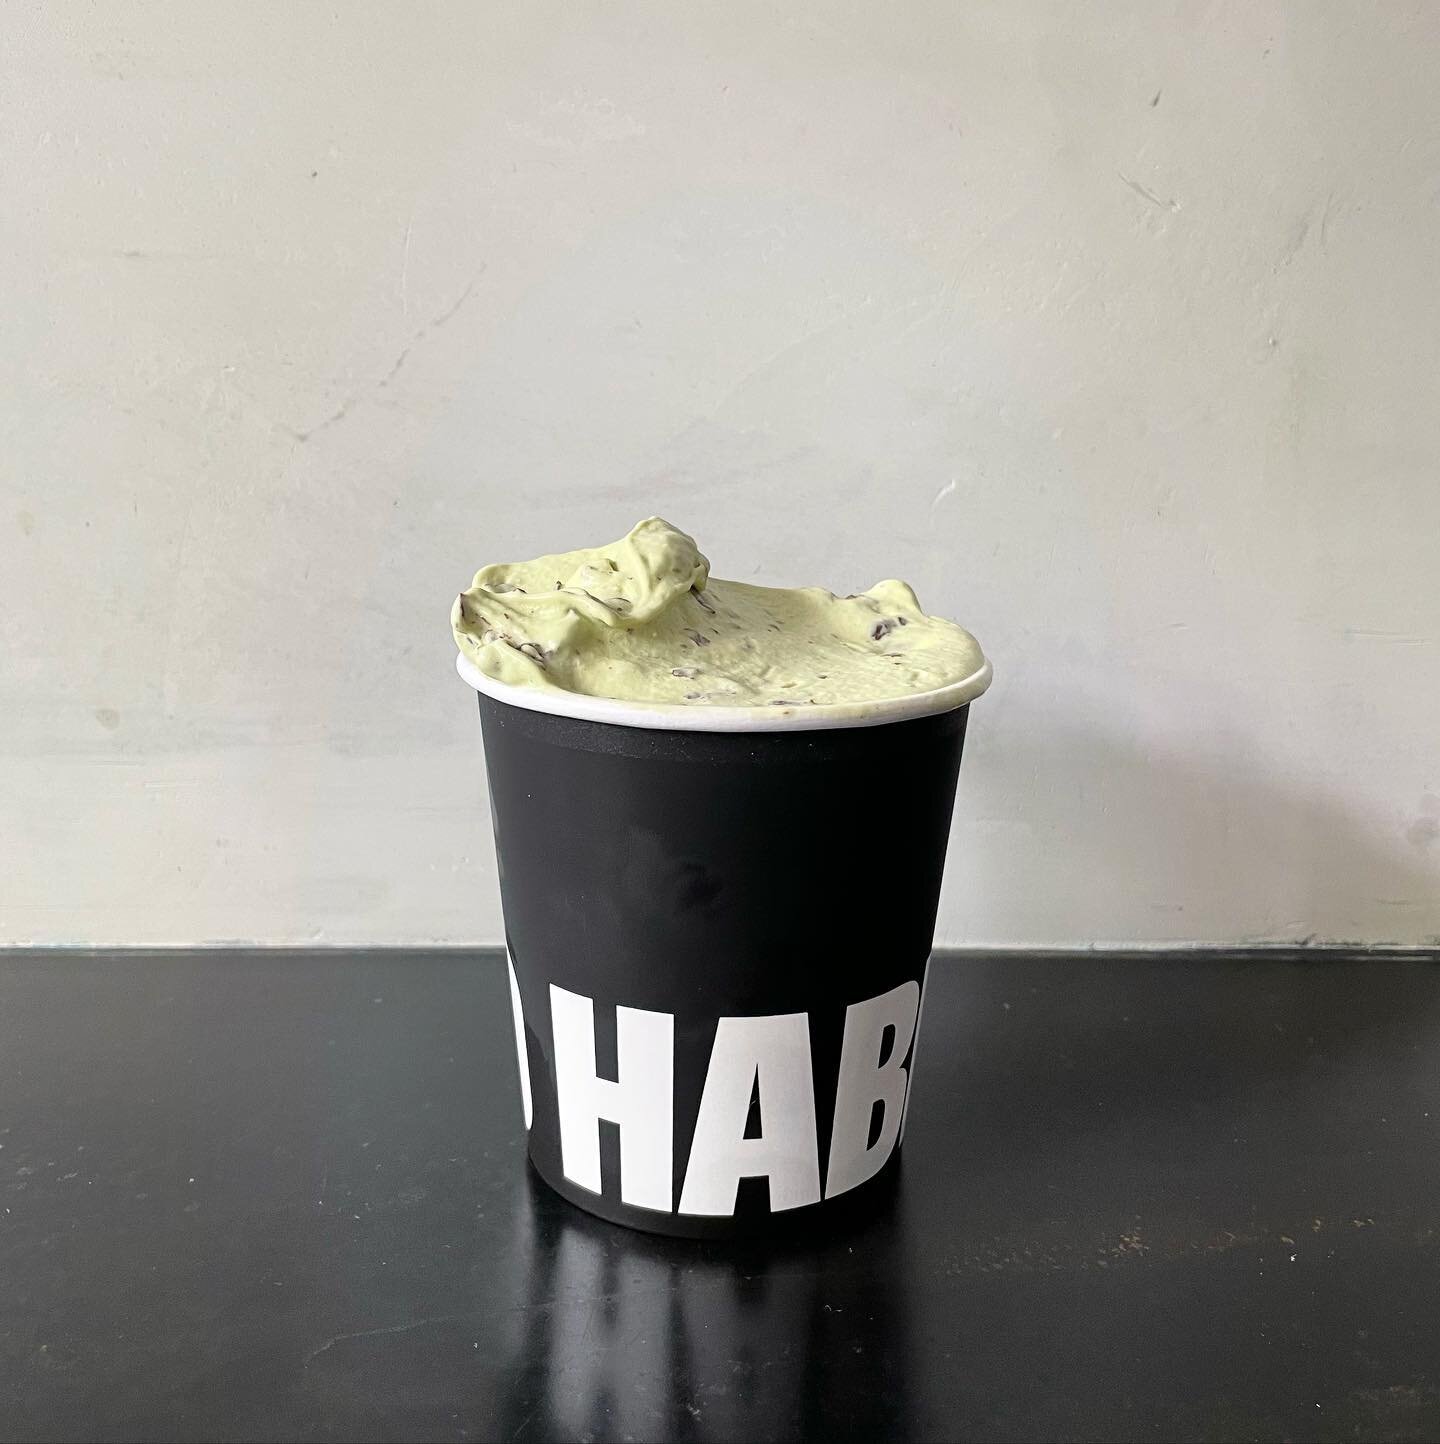 Matcha Stracciatella
In collaboration with @maisonkitsune we dreamed up this favor inspired by Japan &amp; Europe: Matcha ice cream with swirls of dark chocolate shards. Available by the scoop @cafekitsune West Village &amp; Boerum Hill and by the pi